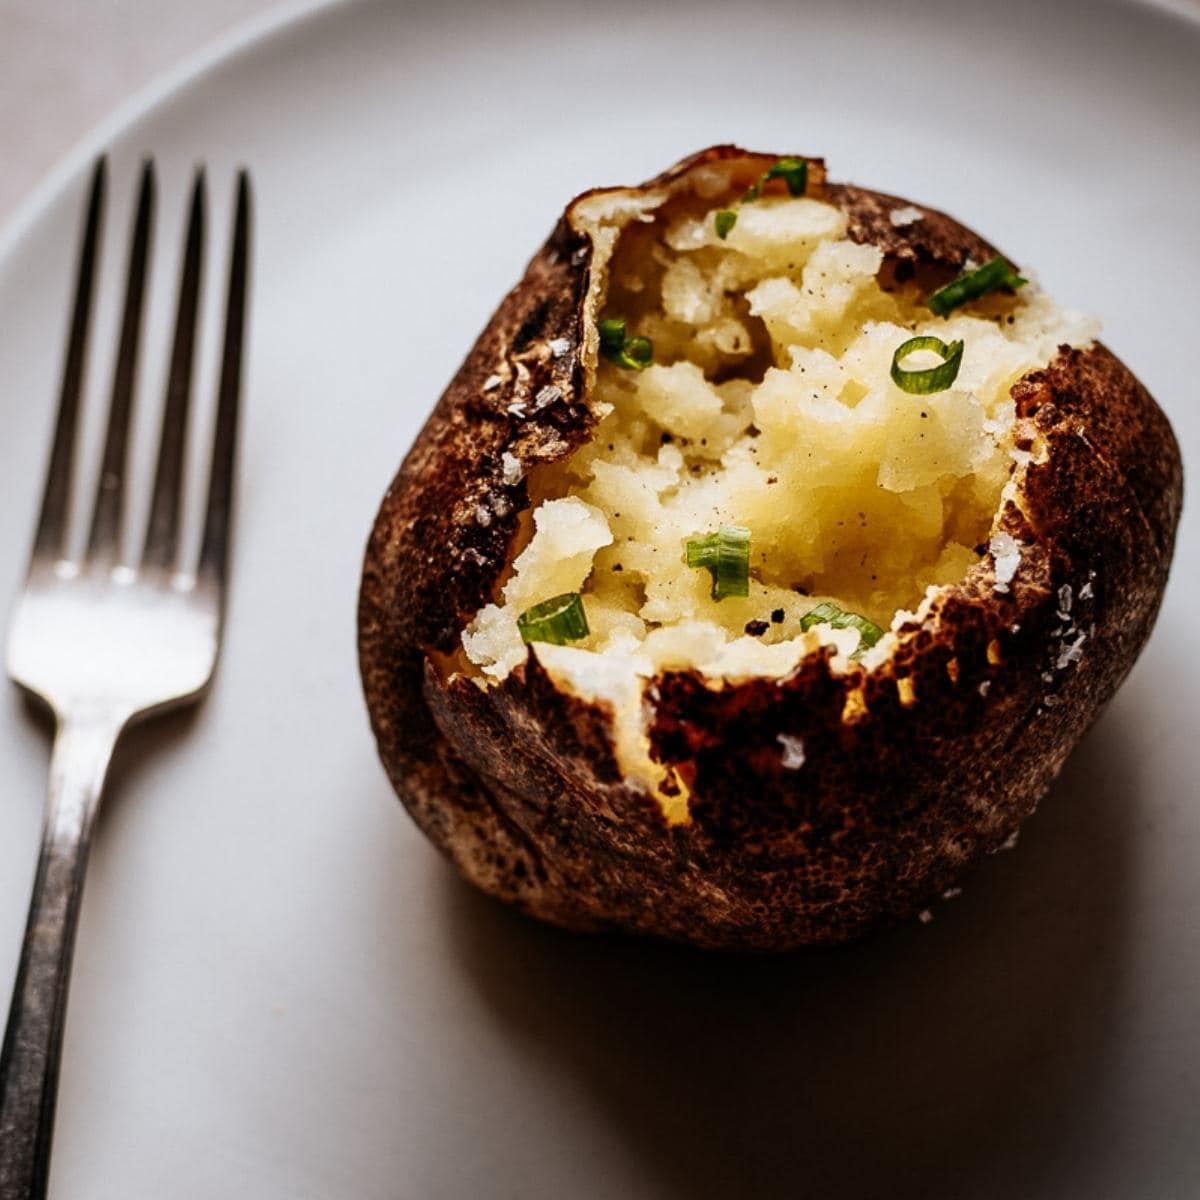 What Goes With Baked Potatoes? 25 Amazing Side Dishes